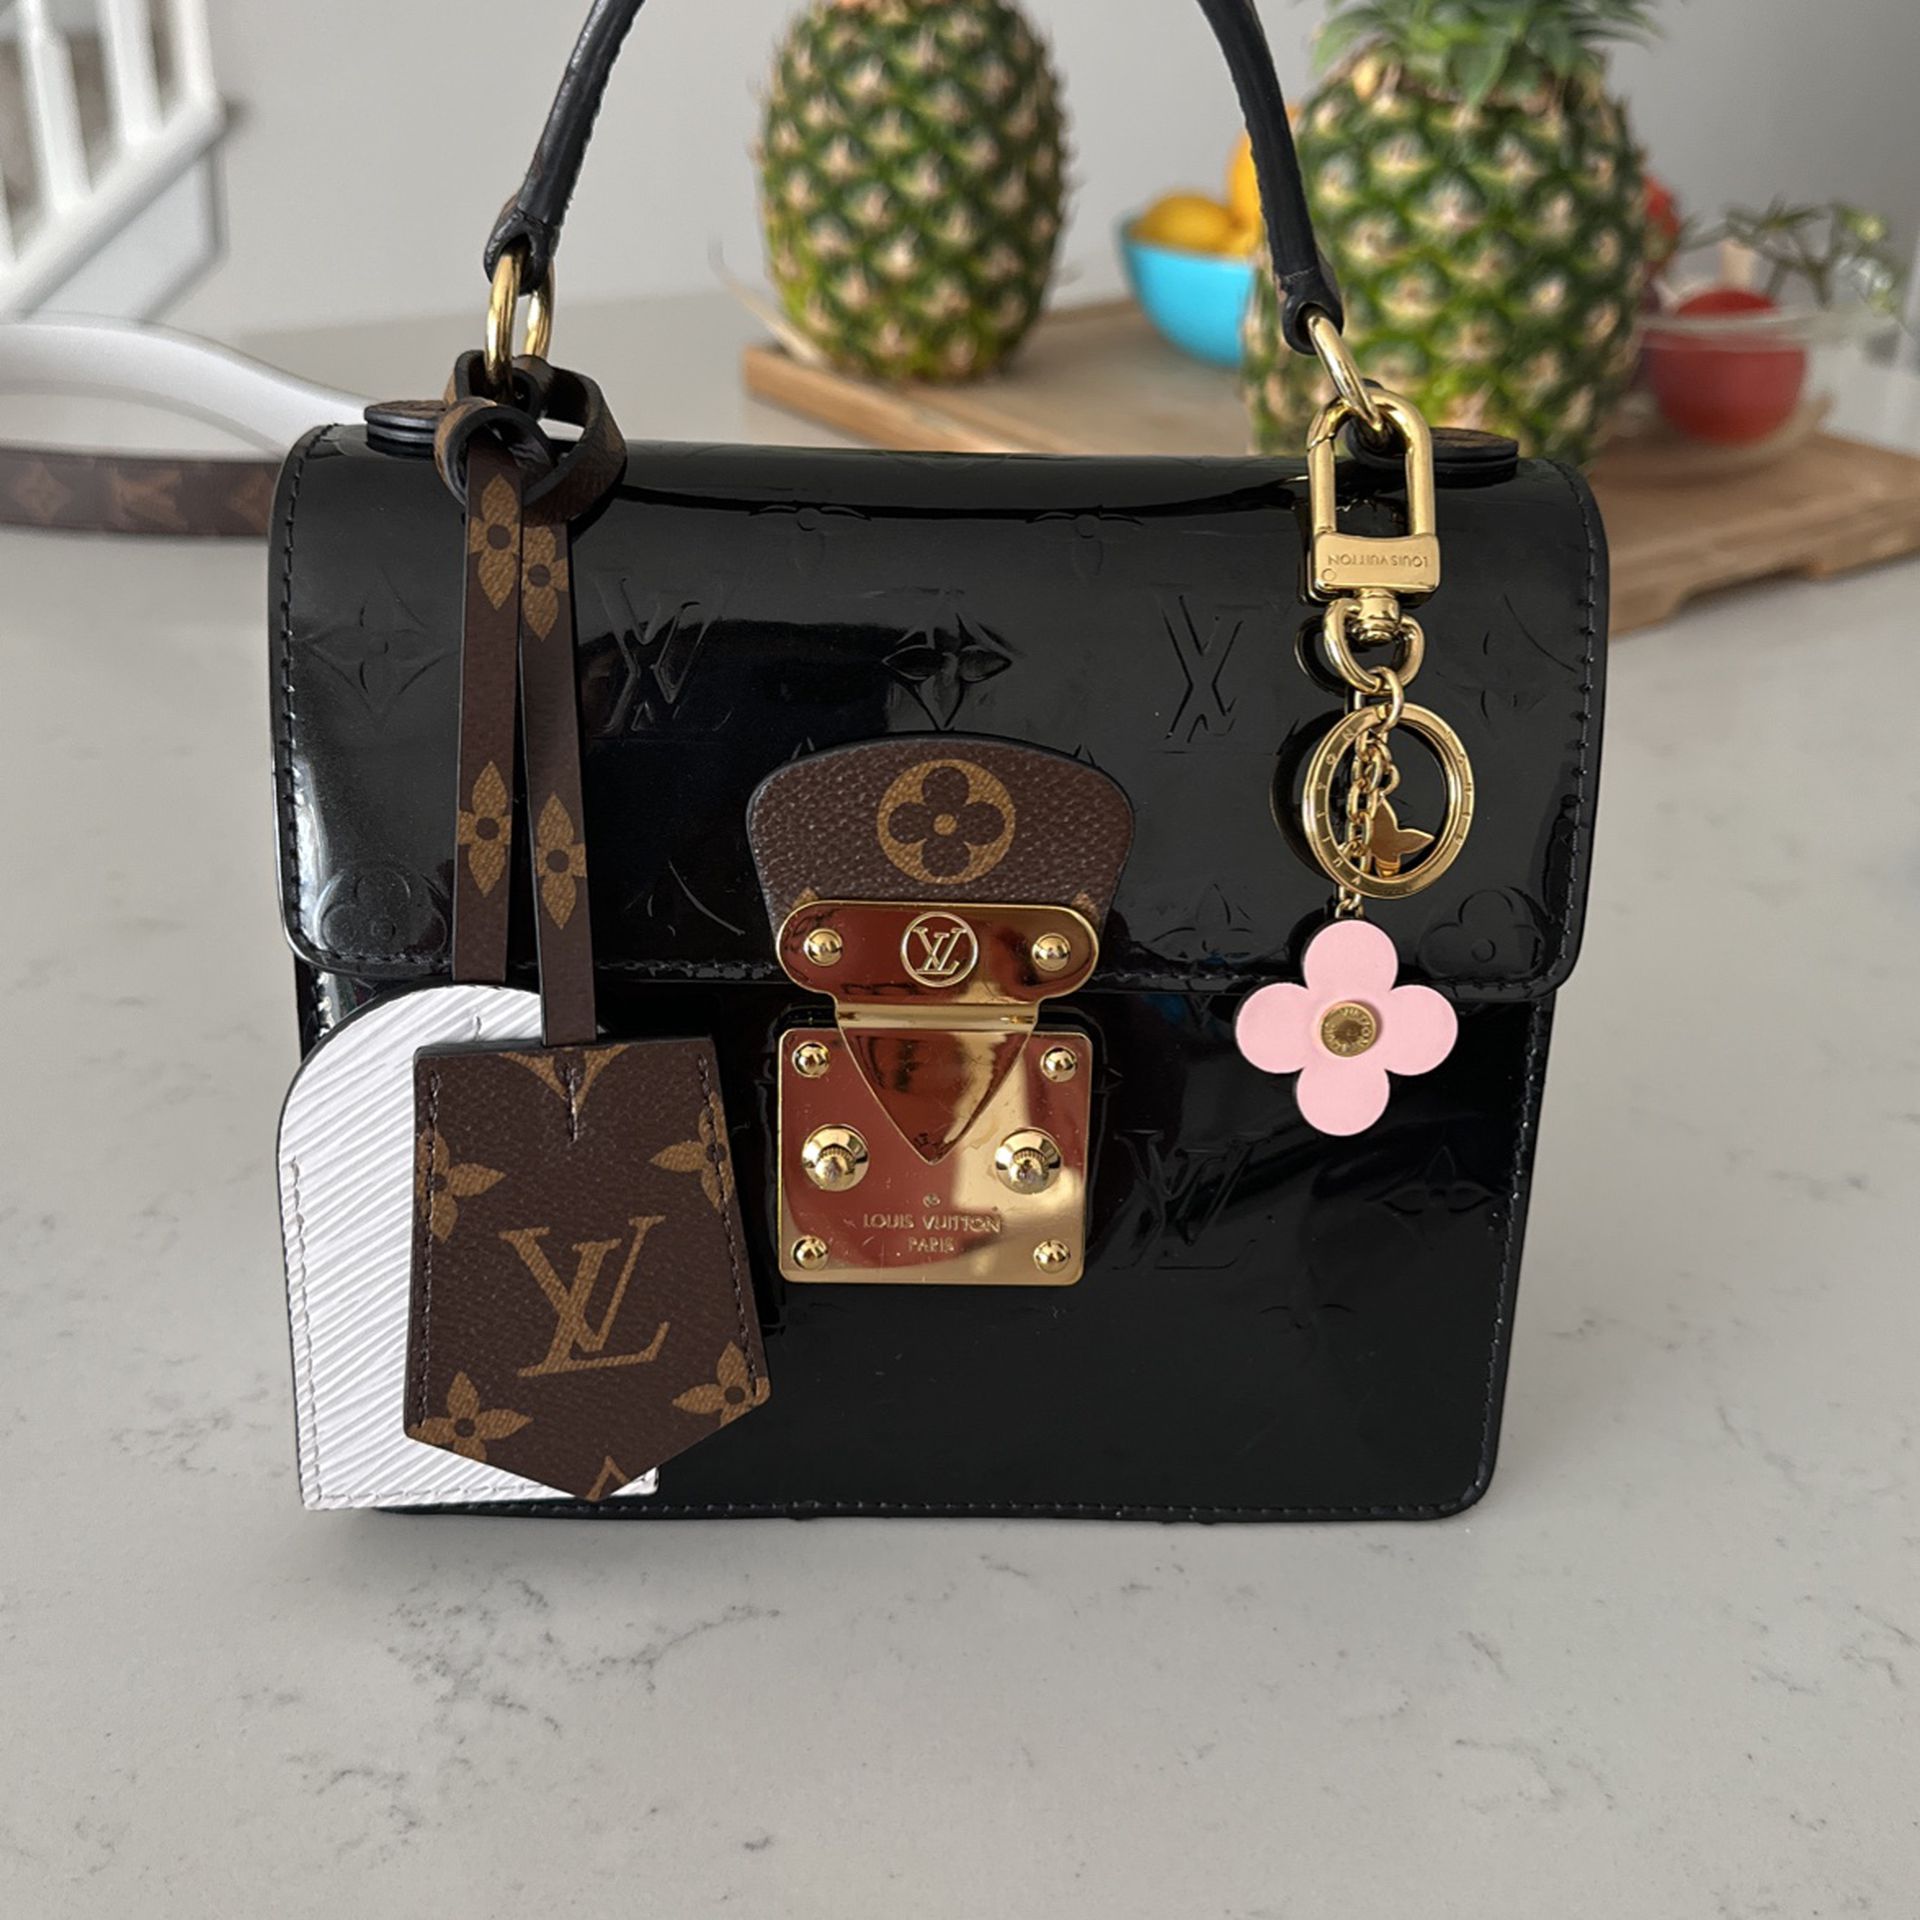 Belmont MM Louis Vuitton Purse for Sale in Charlotte, NC - OfferUp